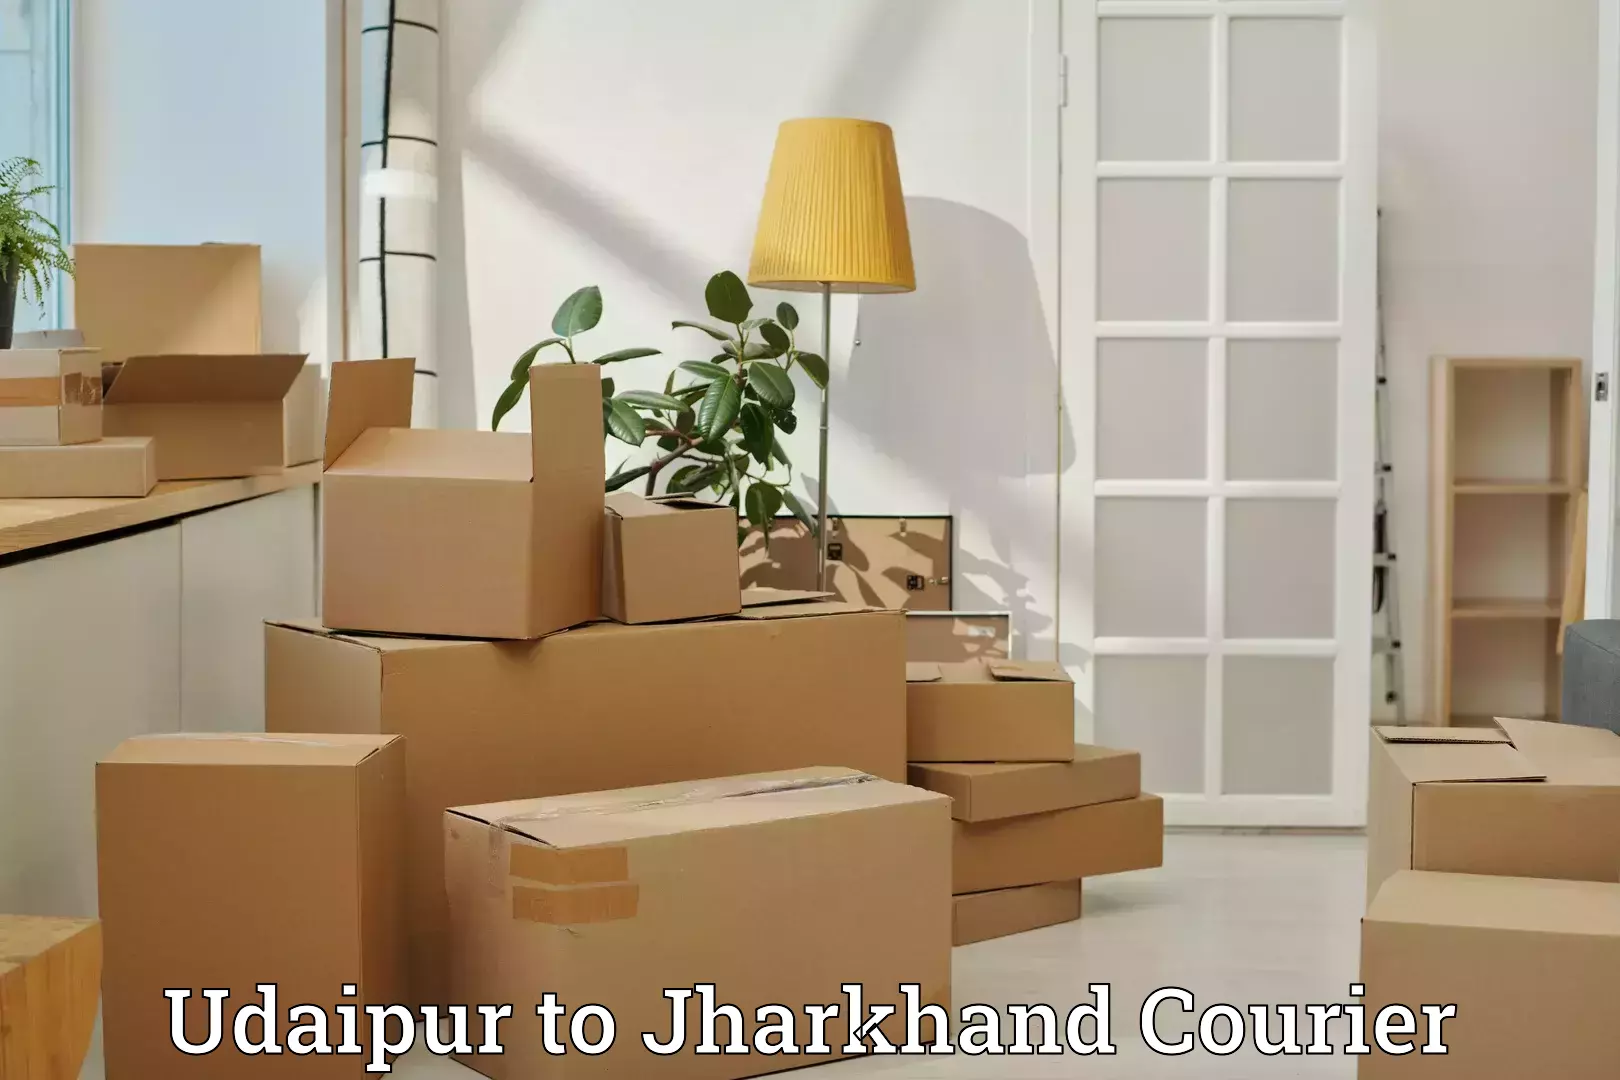 Same day luggage service Udaipur to Jharkhand